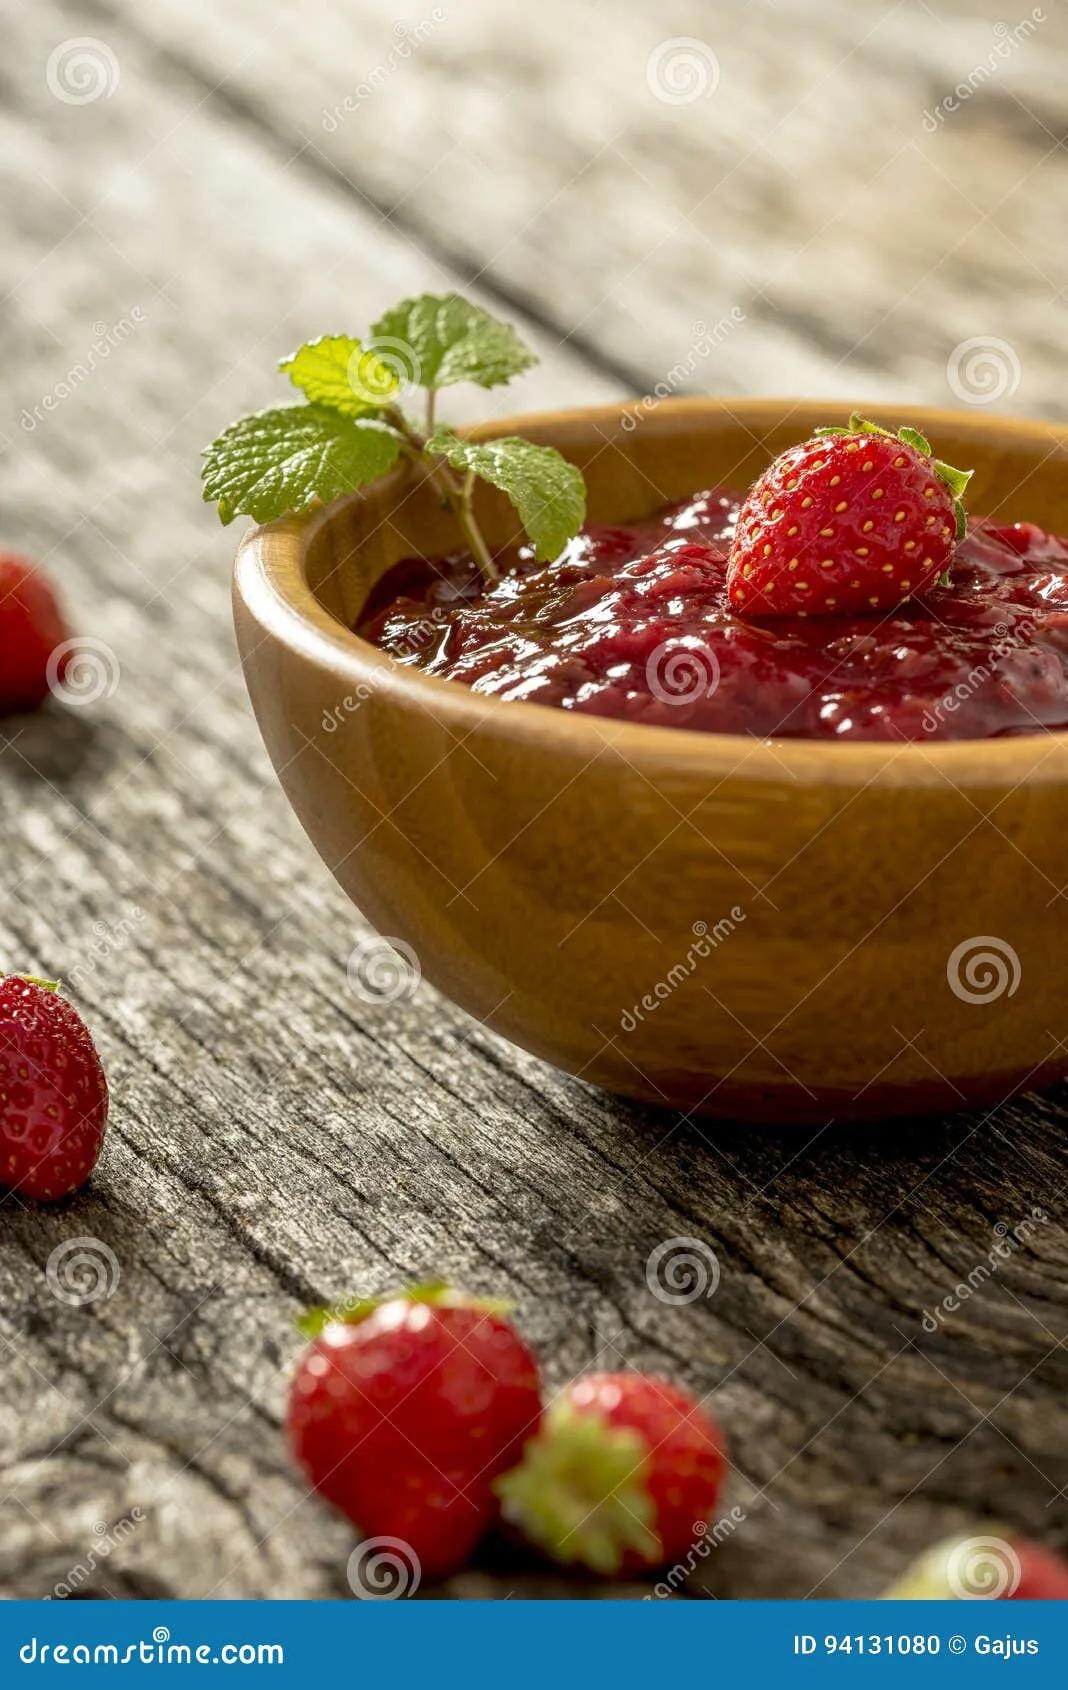 Wooden Bowl Full of Strawberry Marmalade Stock Photo - Image of healthy ...